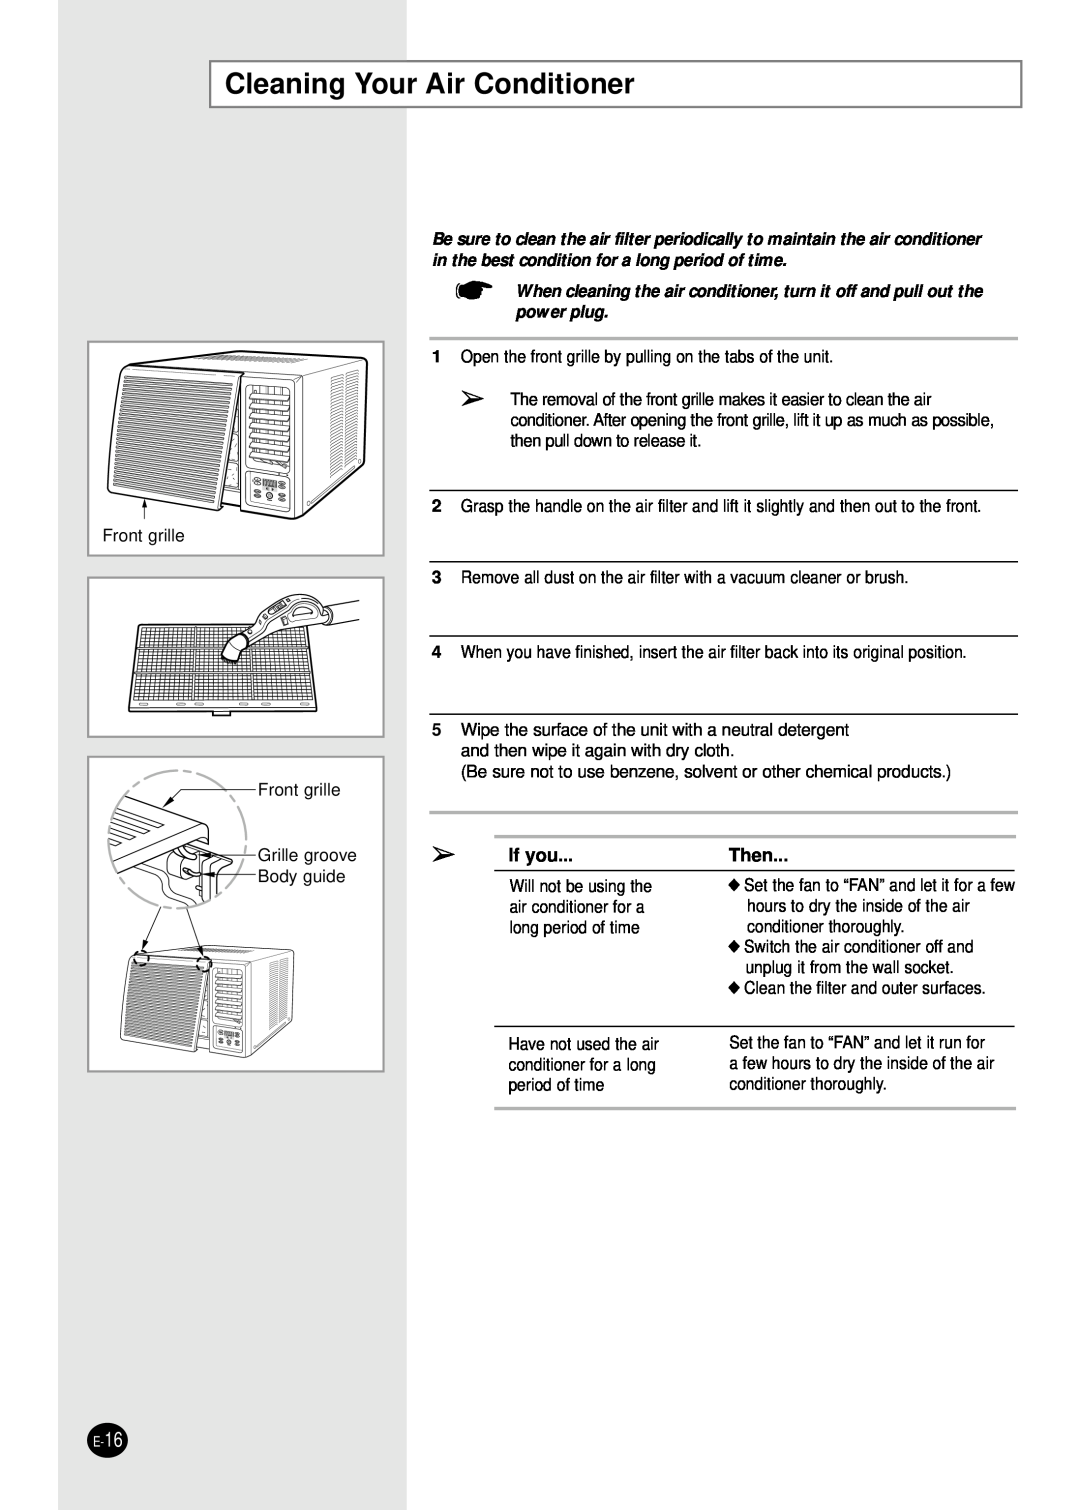 Samsung Model AW089AB manual Cleaning Your Air Conditioner, If you, Then 